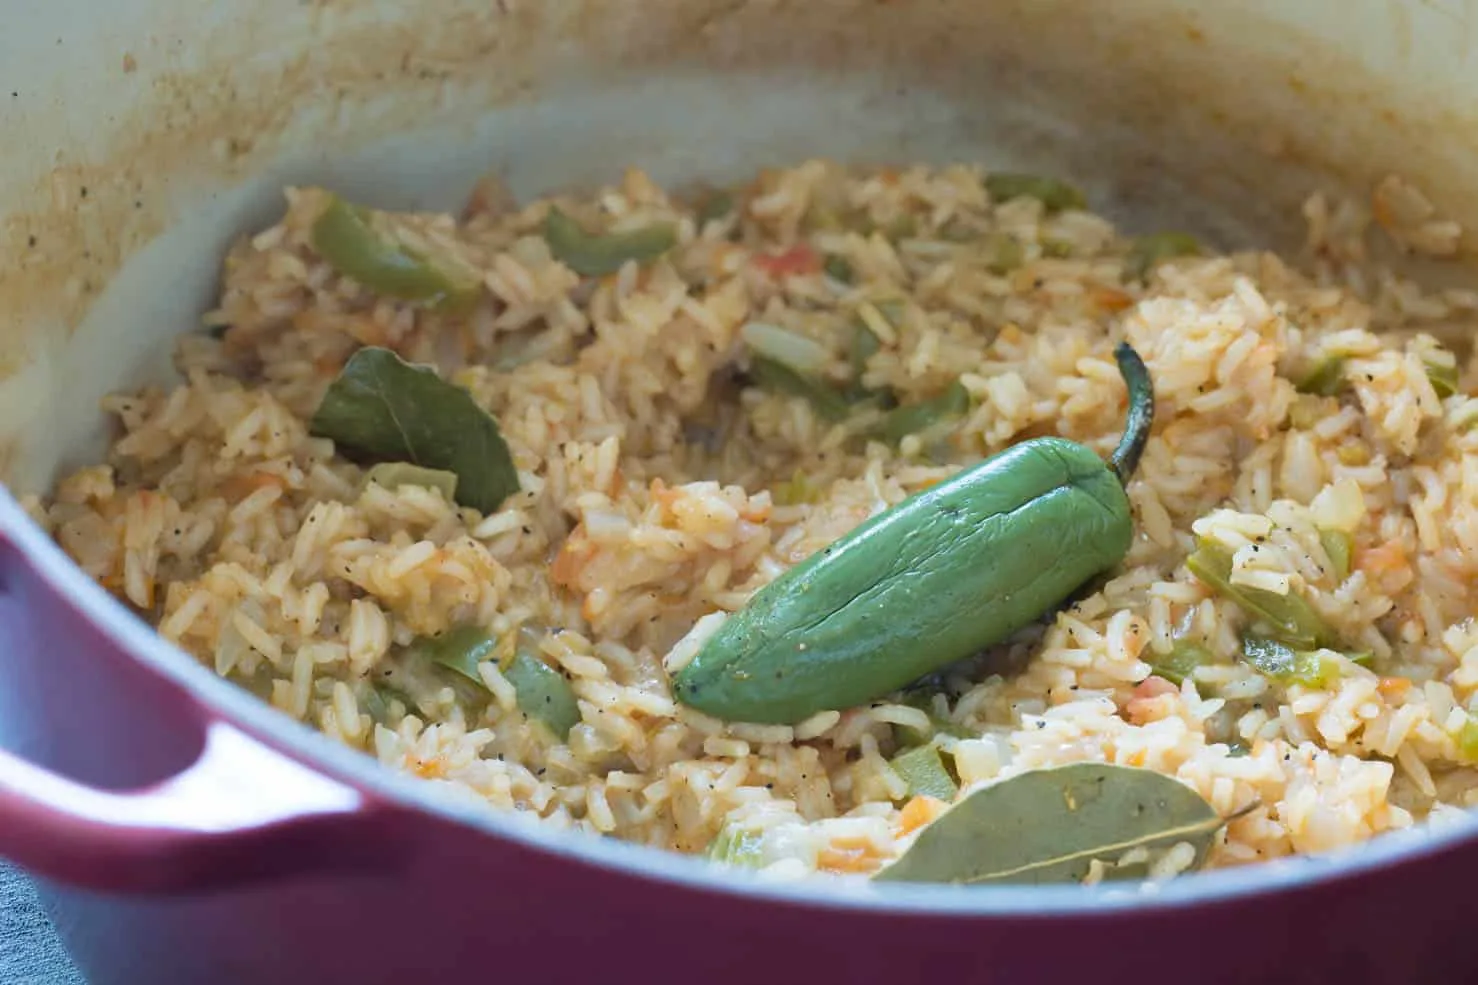 A roasted jalapeno atop mexican rice in a bowl.